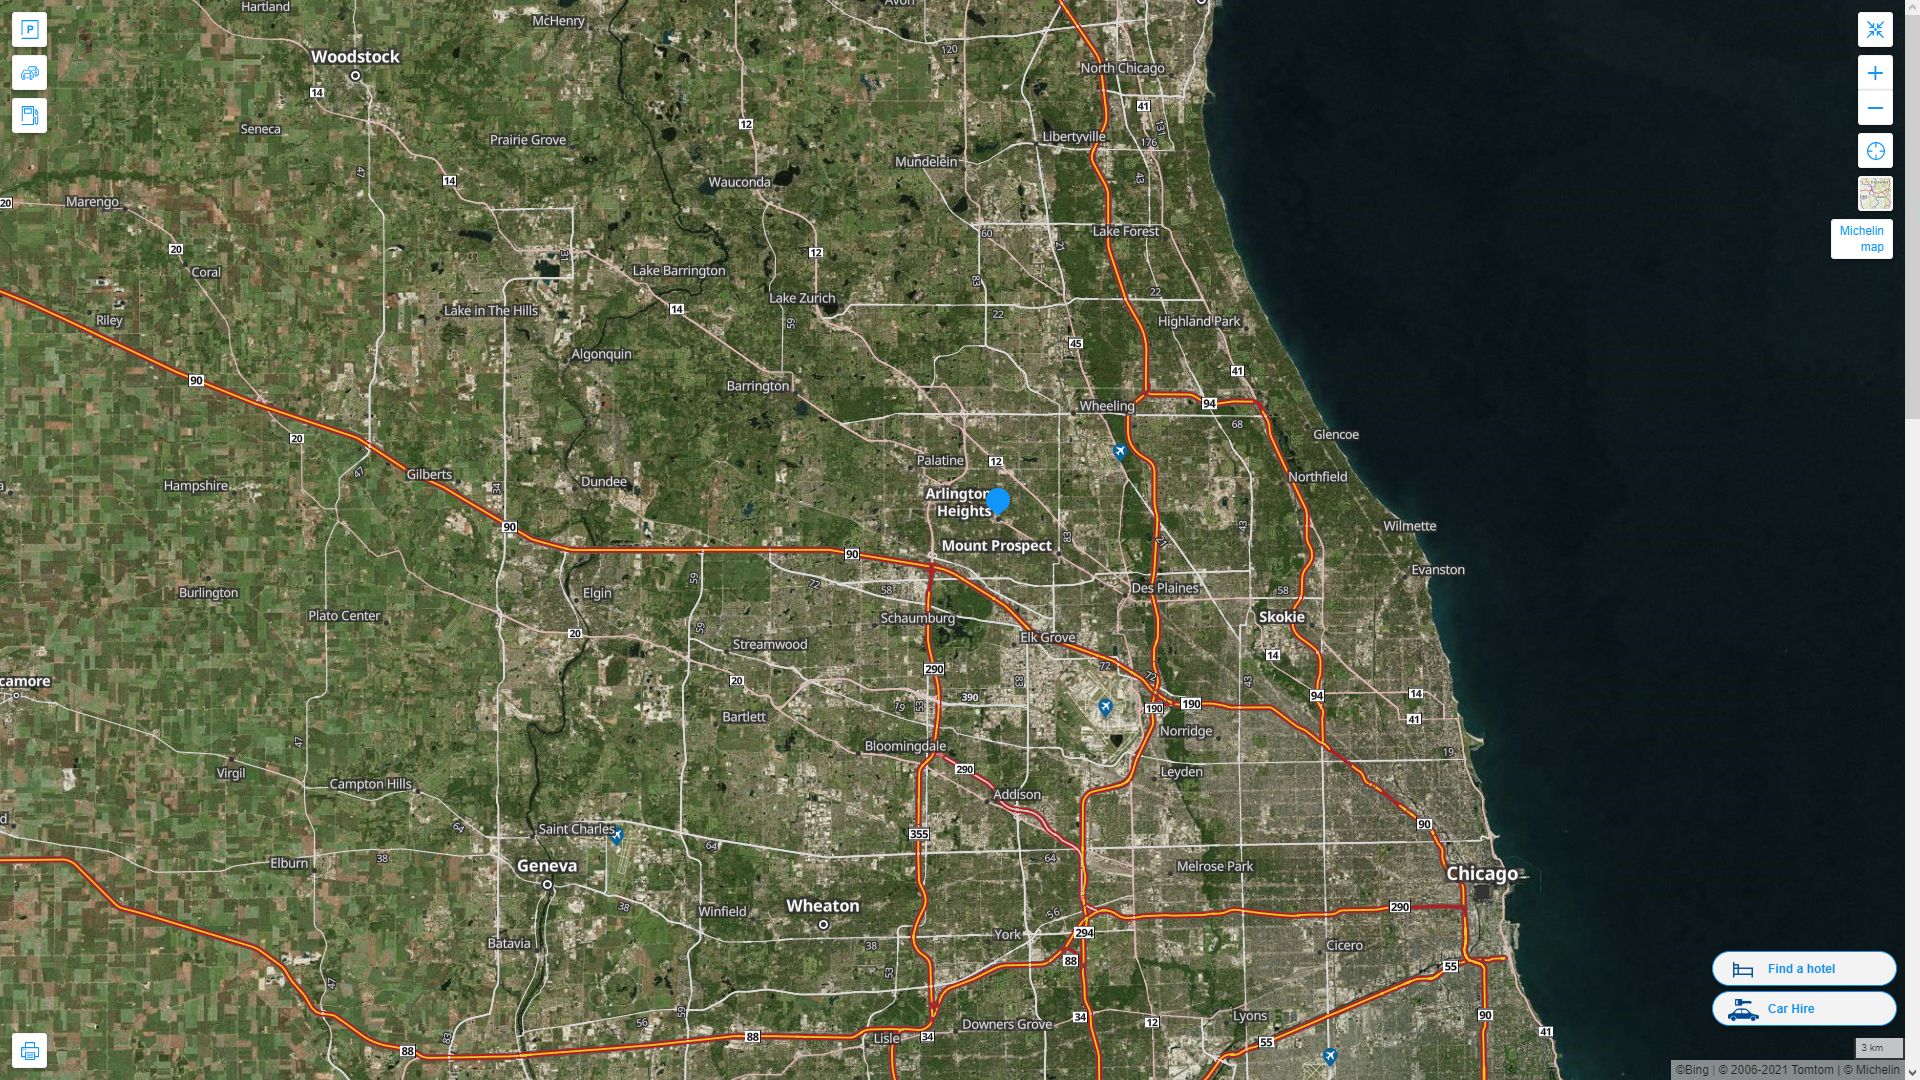 Arlington Heights illinois Highway and Road Map with Satellite View